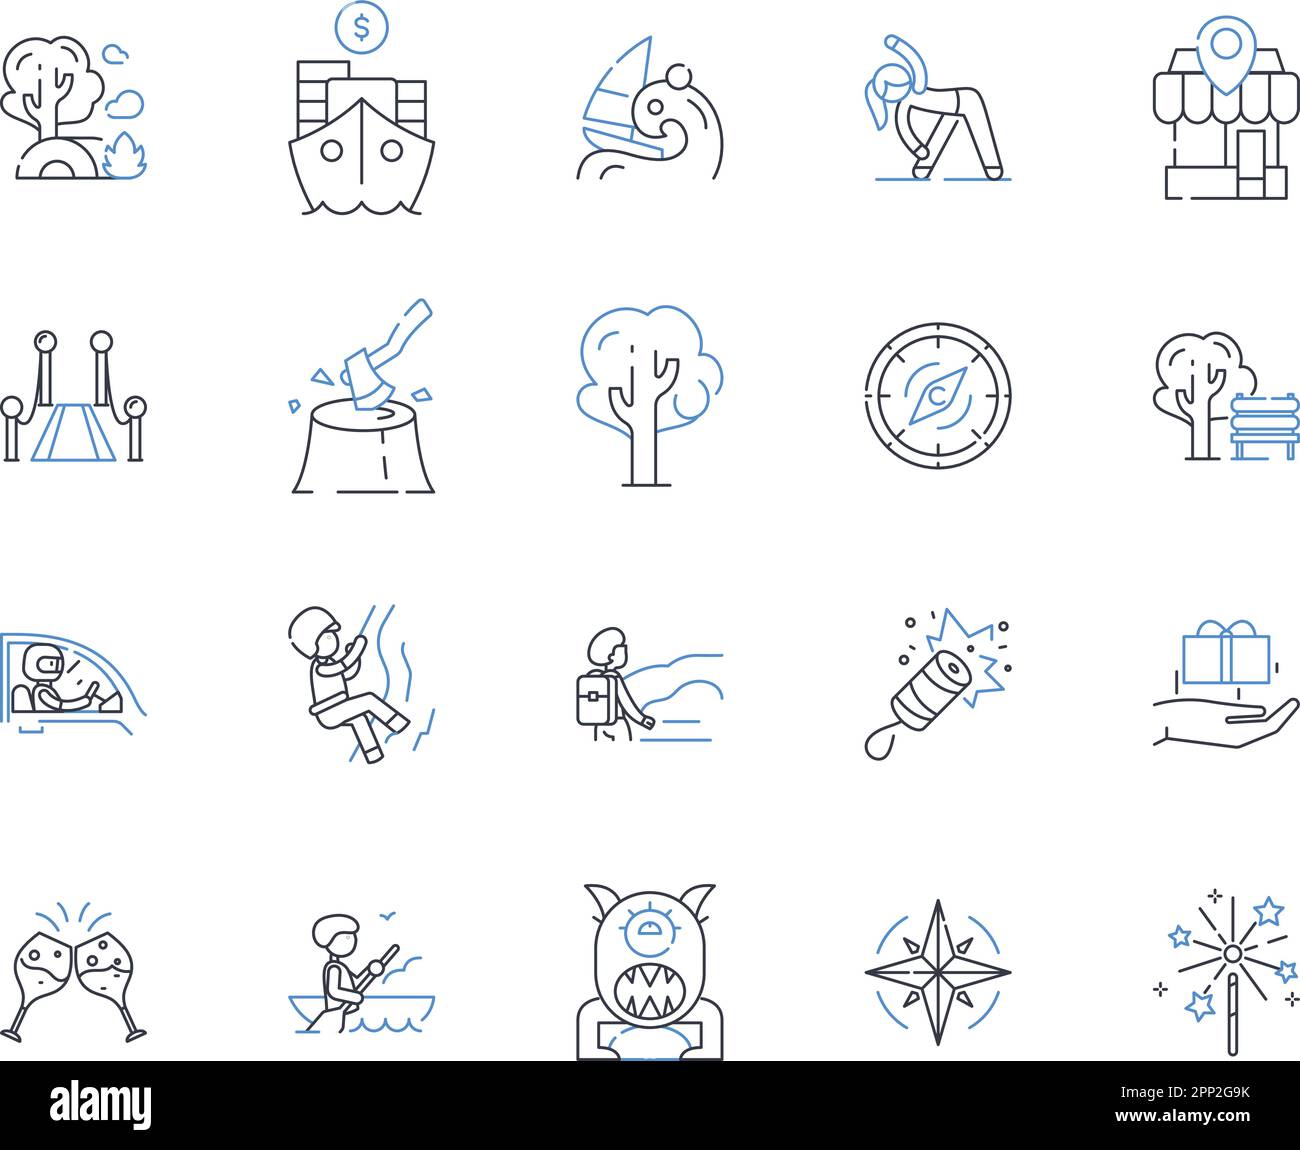 Wearable technology line icons collection. Smartwatch, Fitness tracker, Augmented reality, Virtual reality, Biometric, Headset, Health monitoring Stock Vector